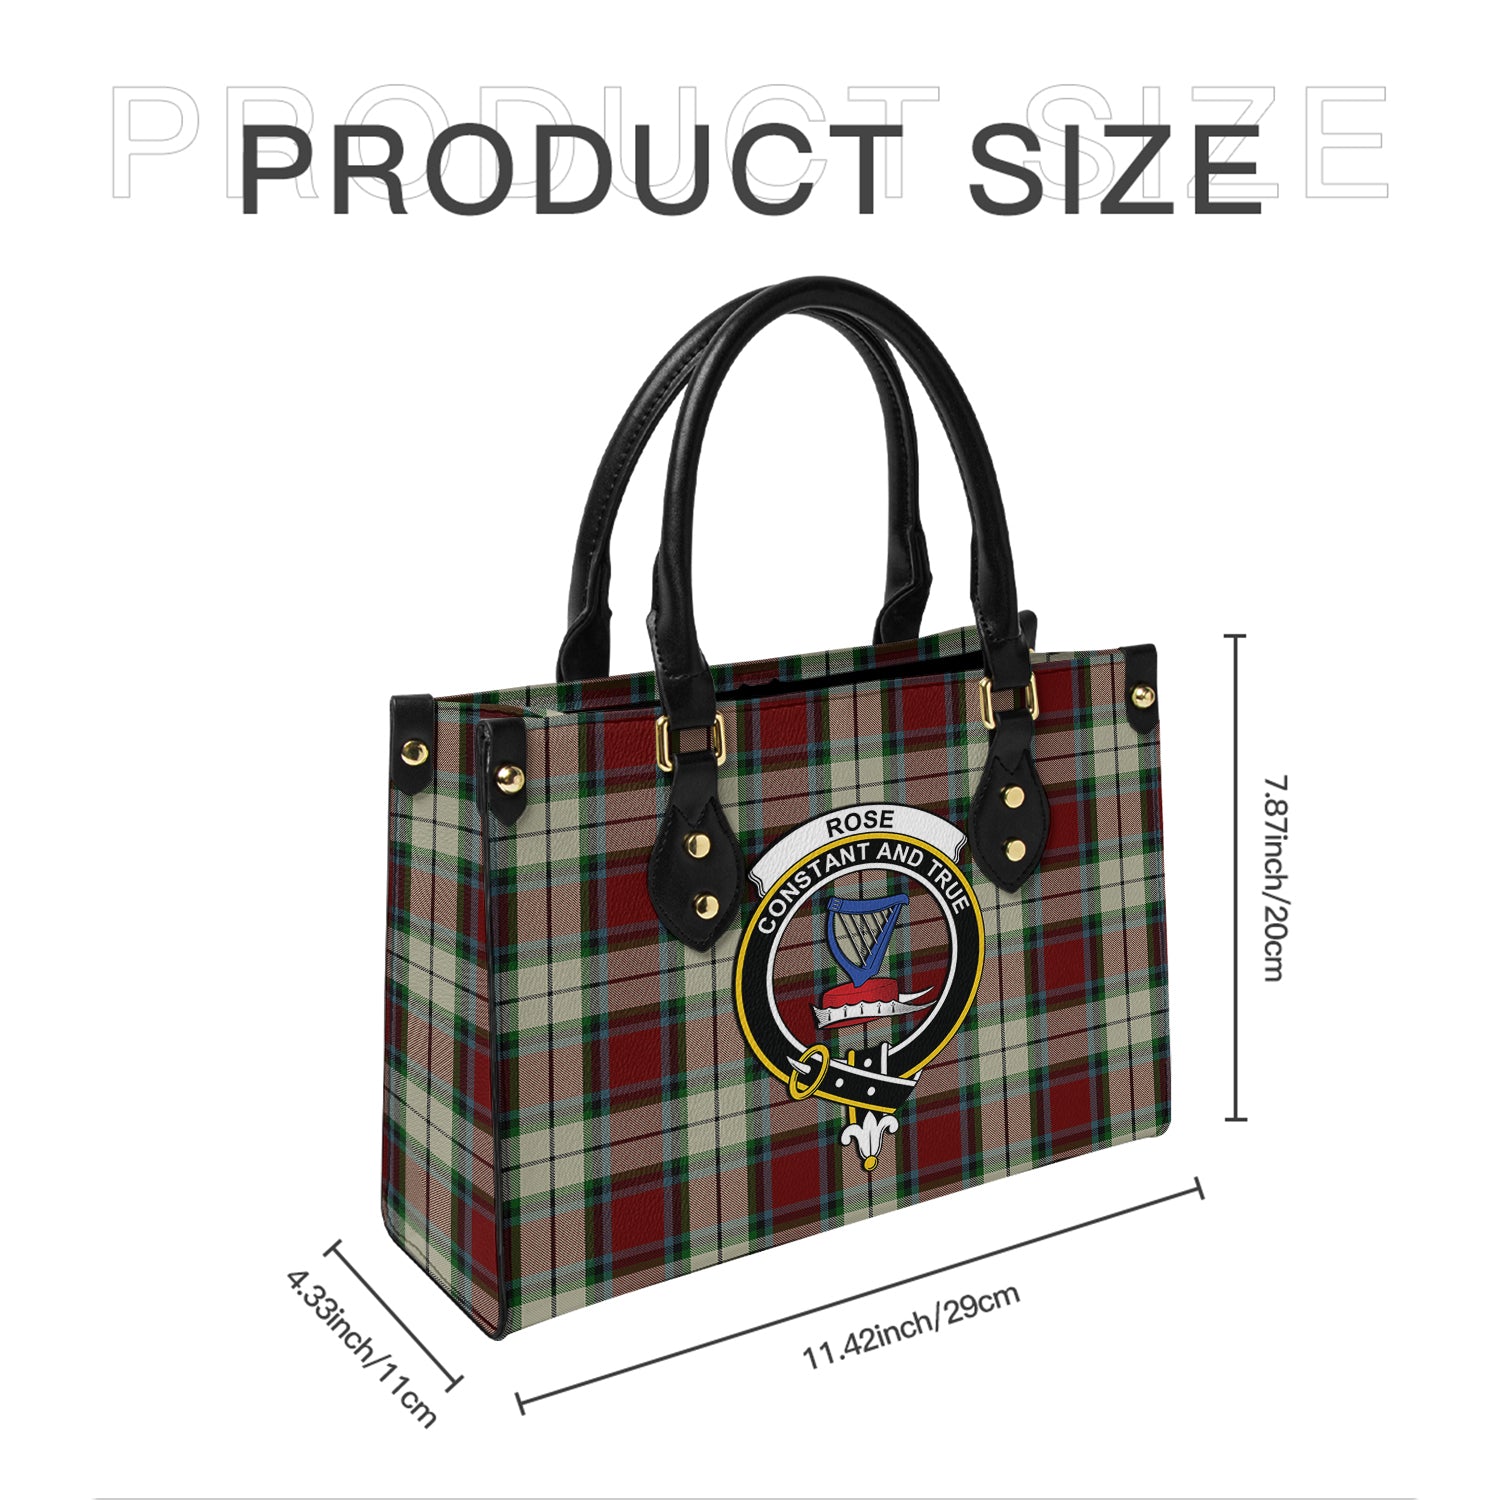 rose-white-dress-tartan-leather-bag-with-family-crest